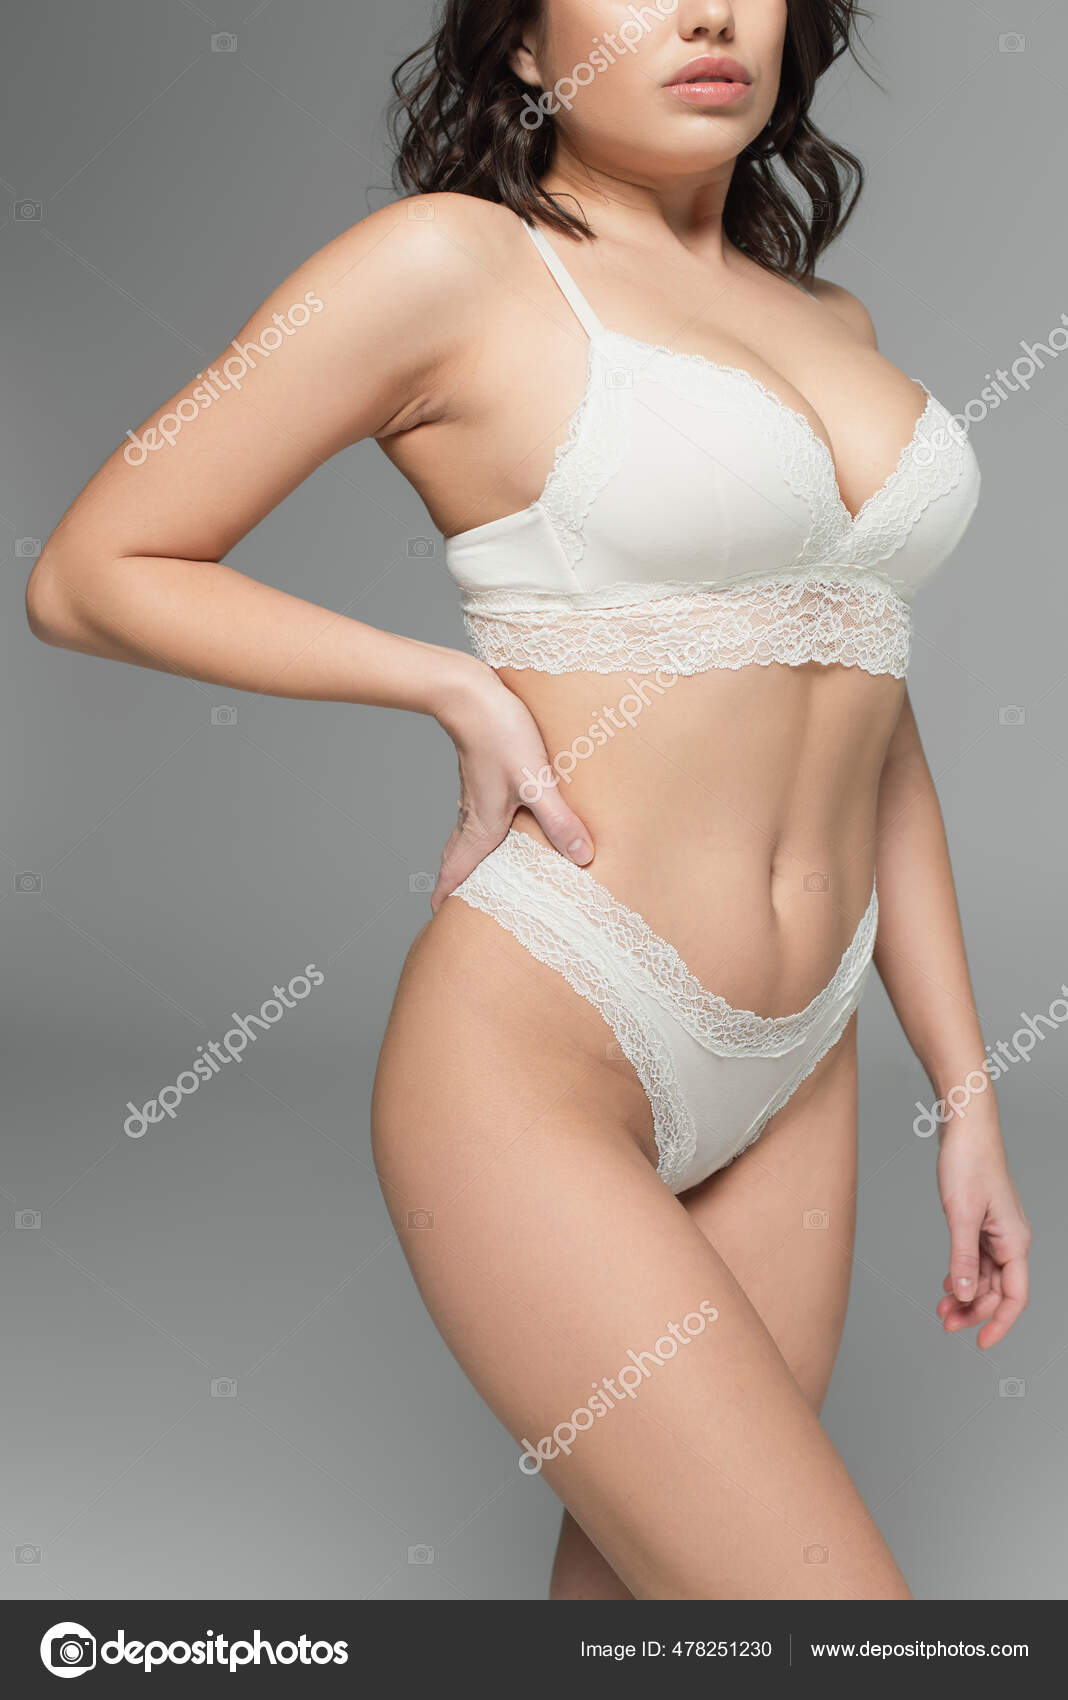 Closeup Body of Model in Lingerie Indoors Stock Photo - Image of brunette,  bust: 124498328